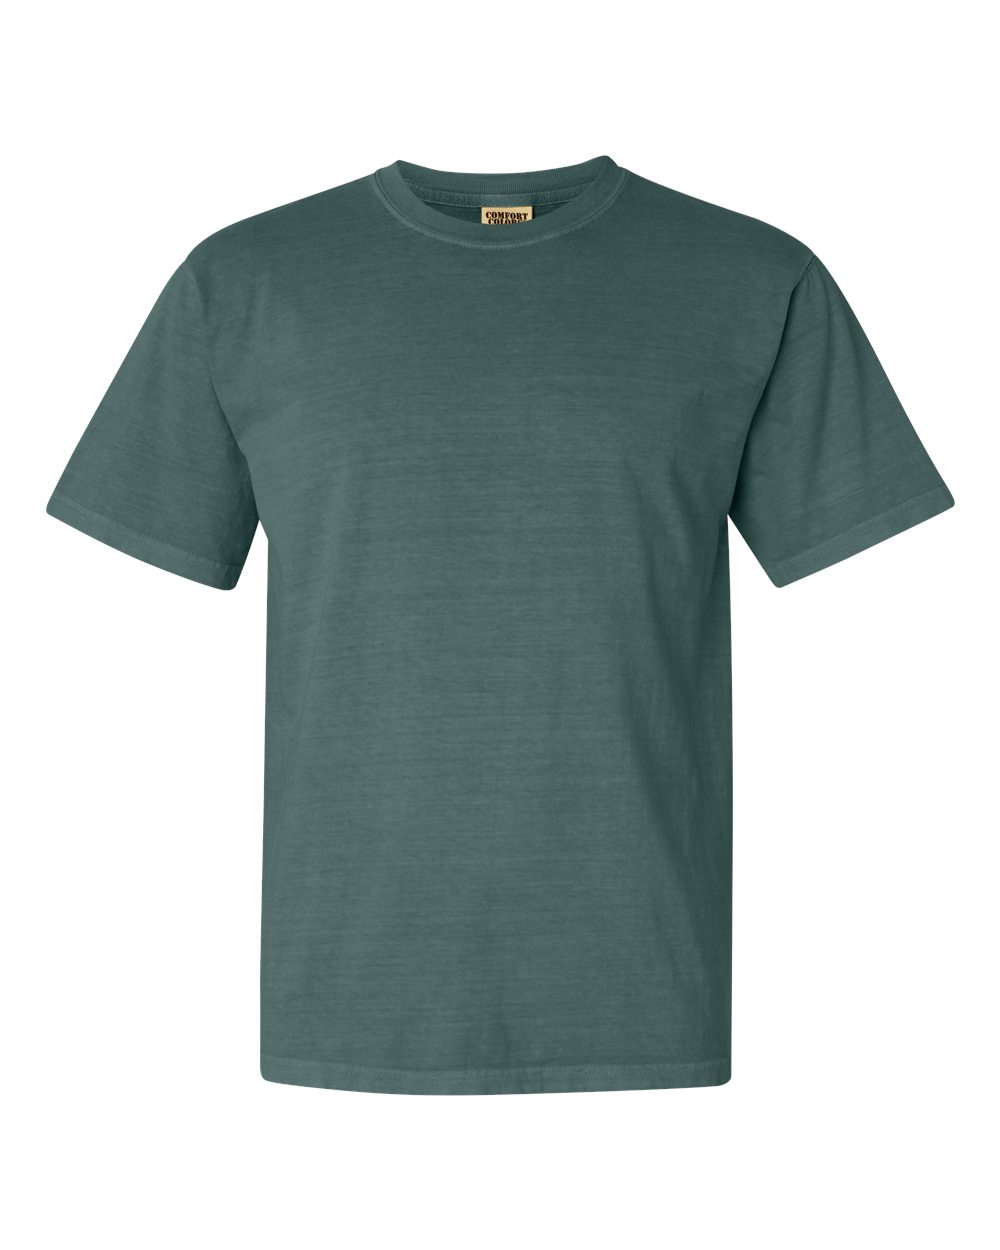 Comfort Colors Garment-Dyed Tee (1717) in Blue Spruce